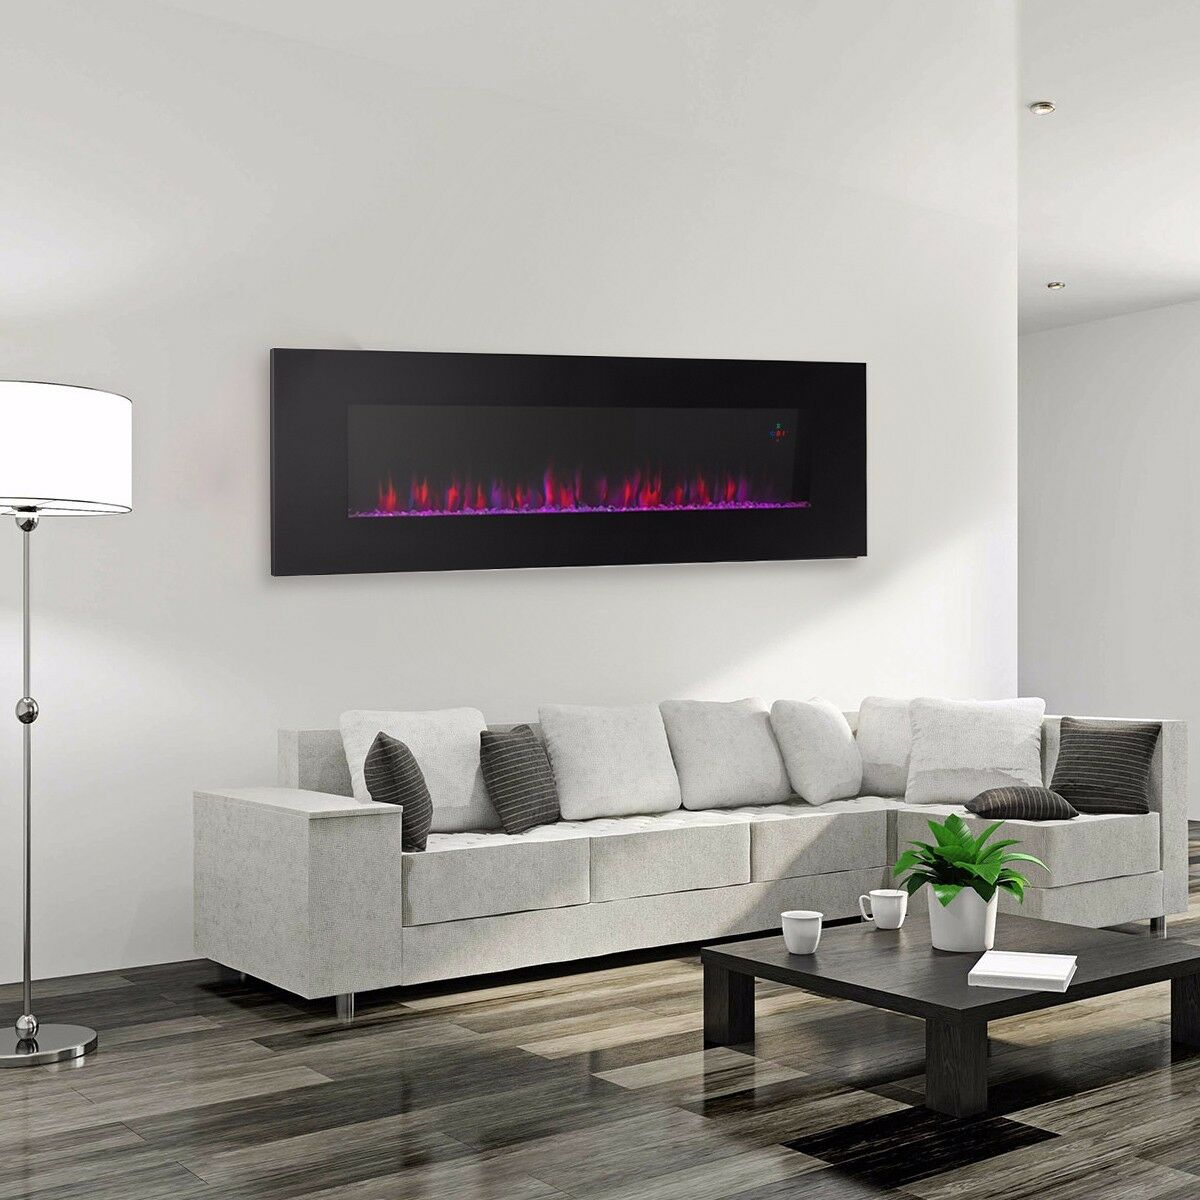 50" Contemporary Electric Fireplace — Black Heater with Multi Flame and Remote Controller — Wall Mounted or Recessed